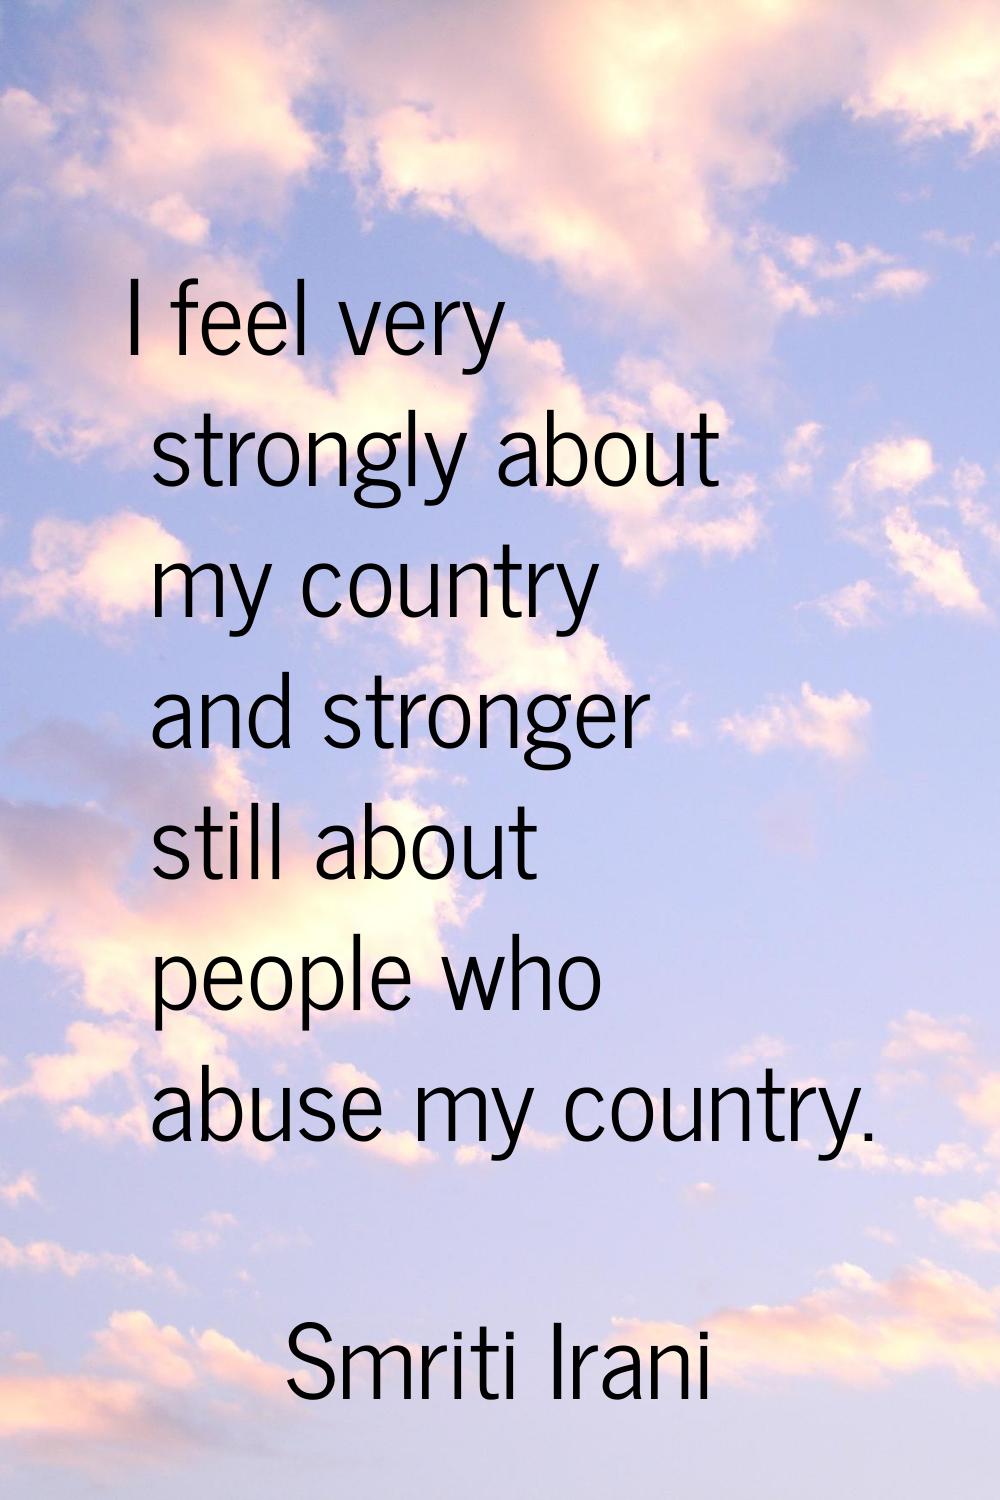 I feel very strongly about my country and stronger still about people who abuse my country.